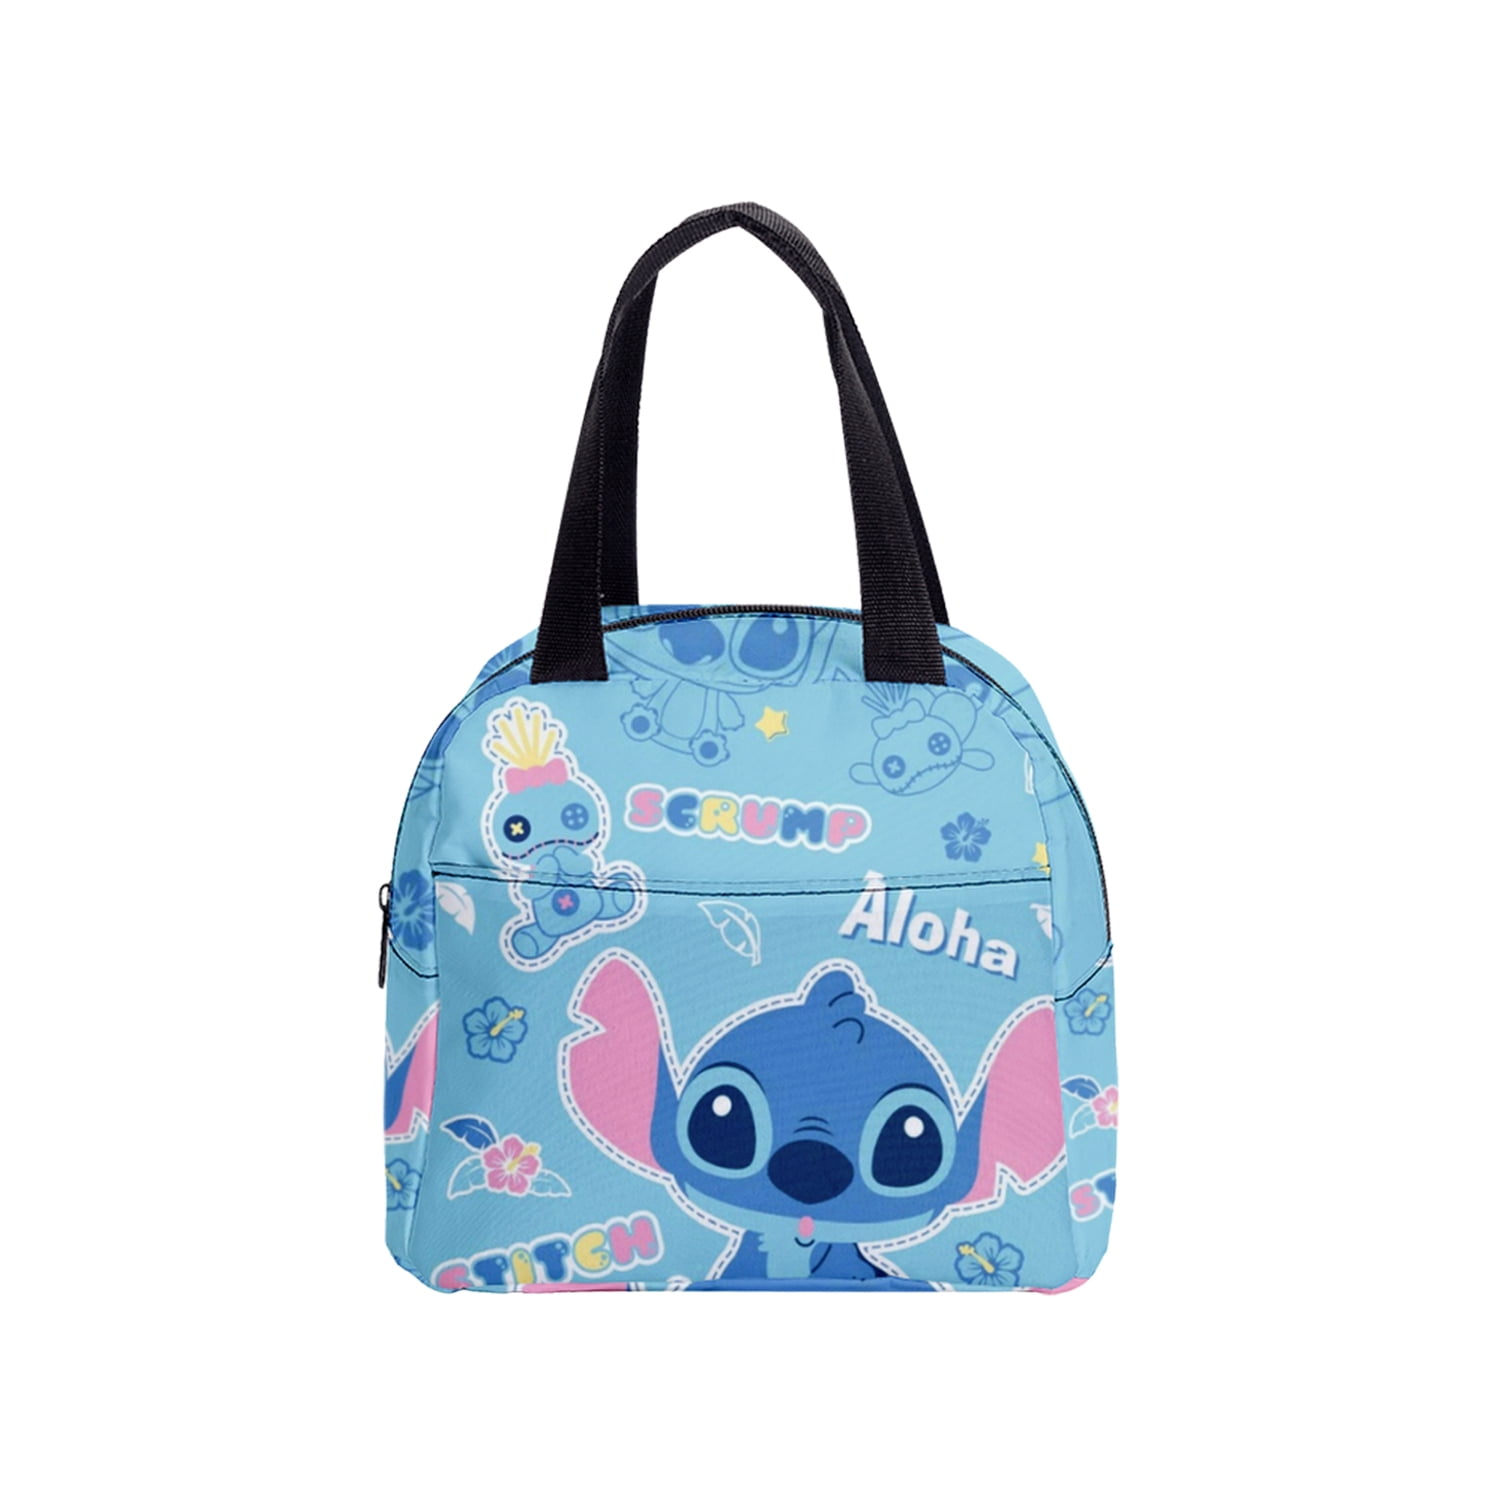 Loli&Stitch Anime Reusable Insulated Cooler Lunch Boxes,#B01 - Walmart.com